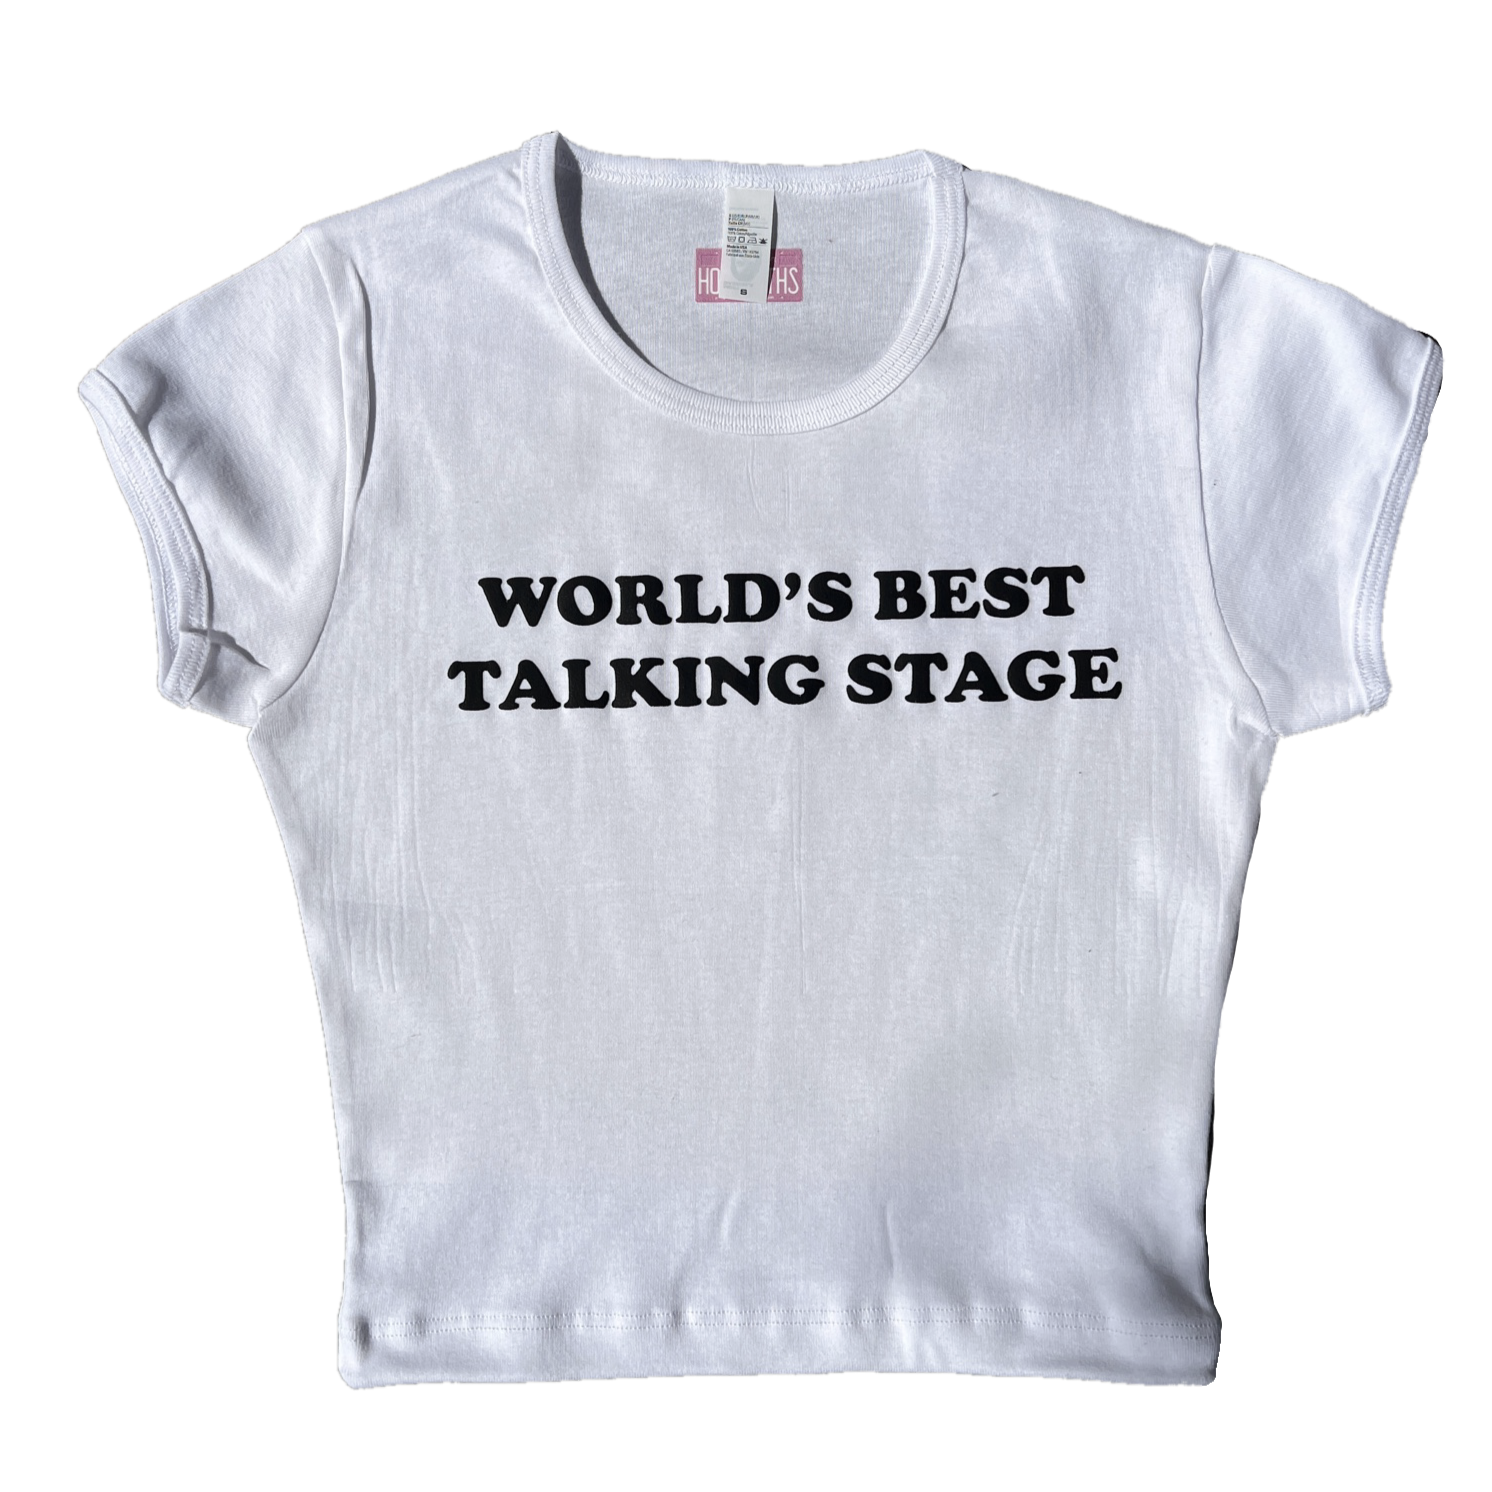 LAST CHANCE - WORLD'S BEST TALKING STAGE Baby Tee